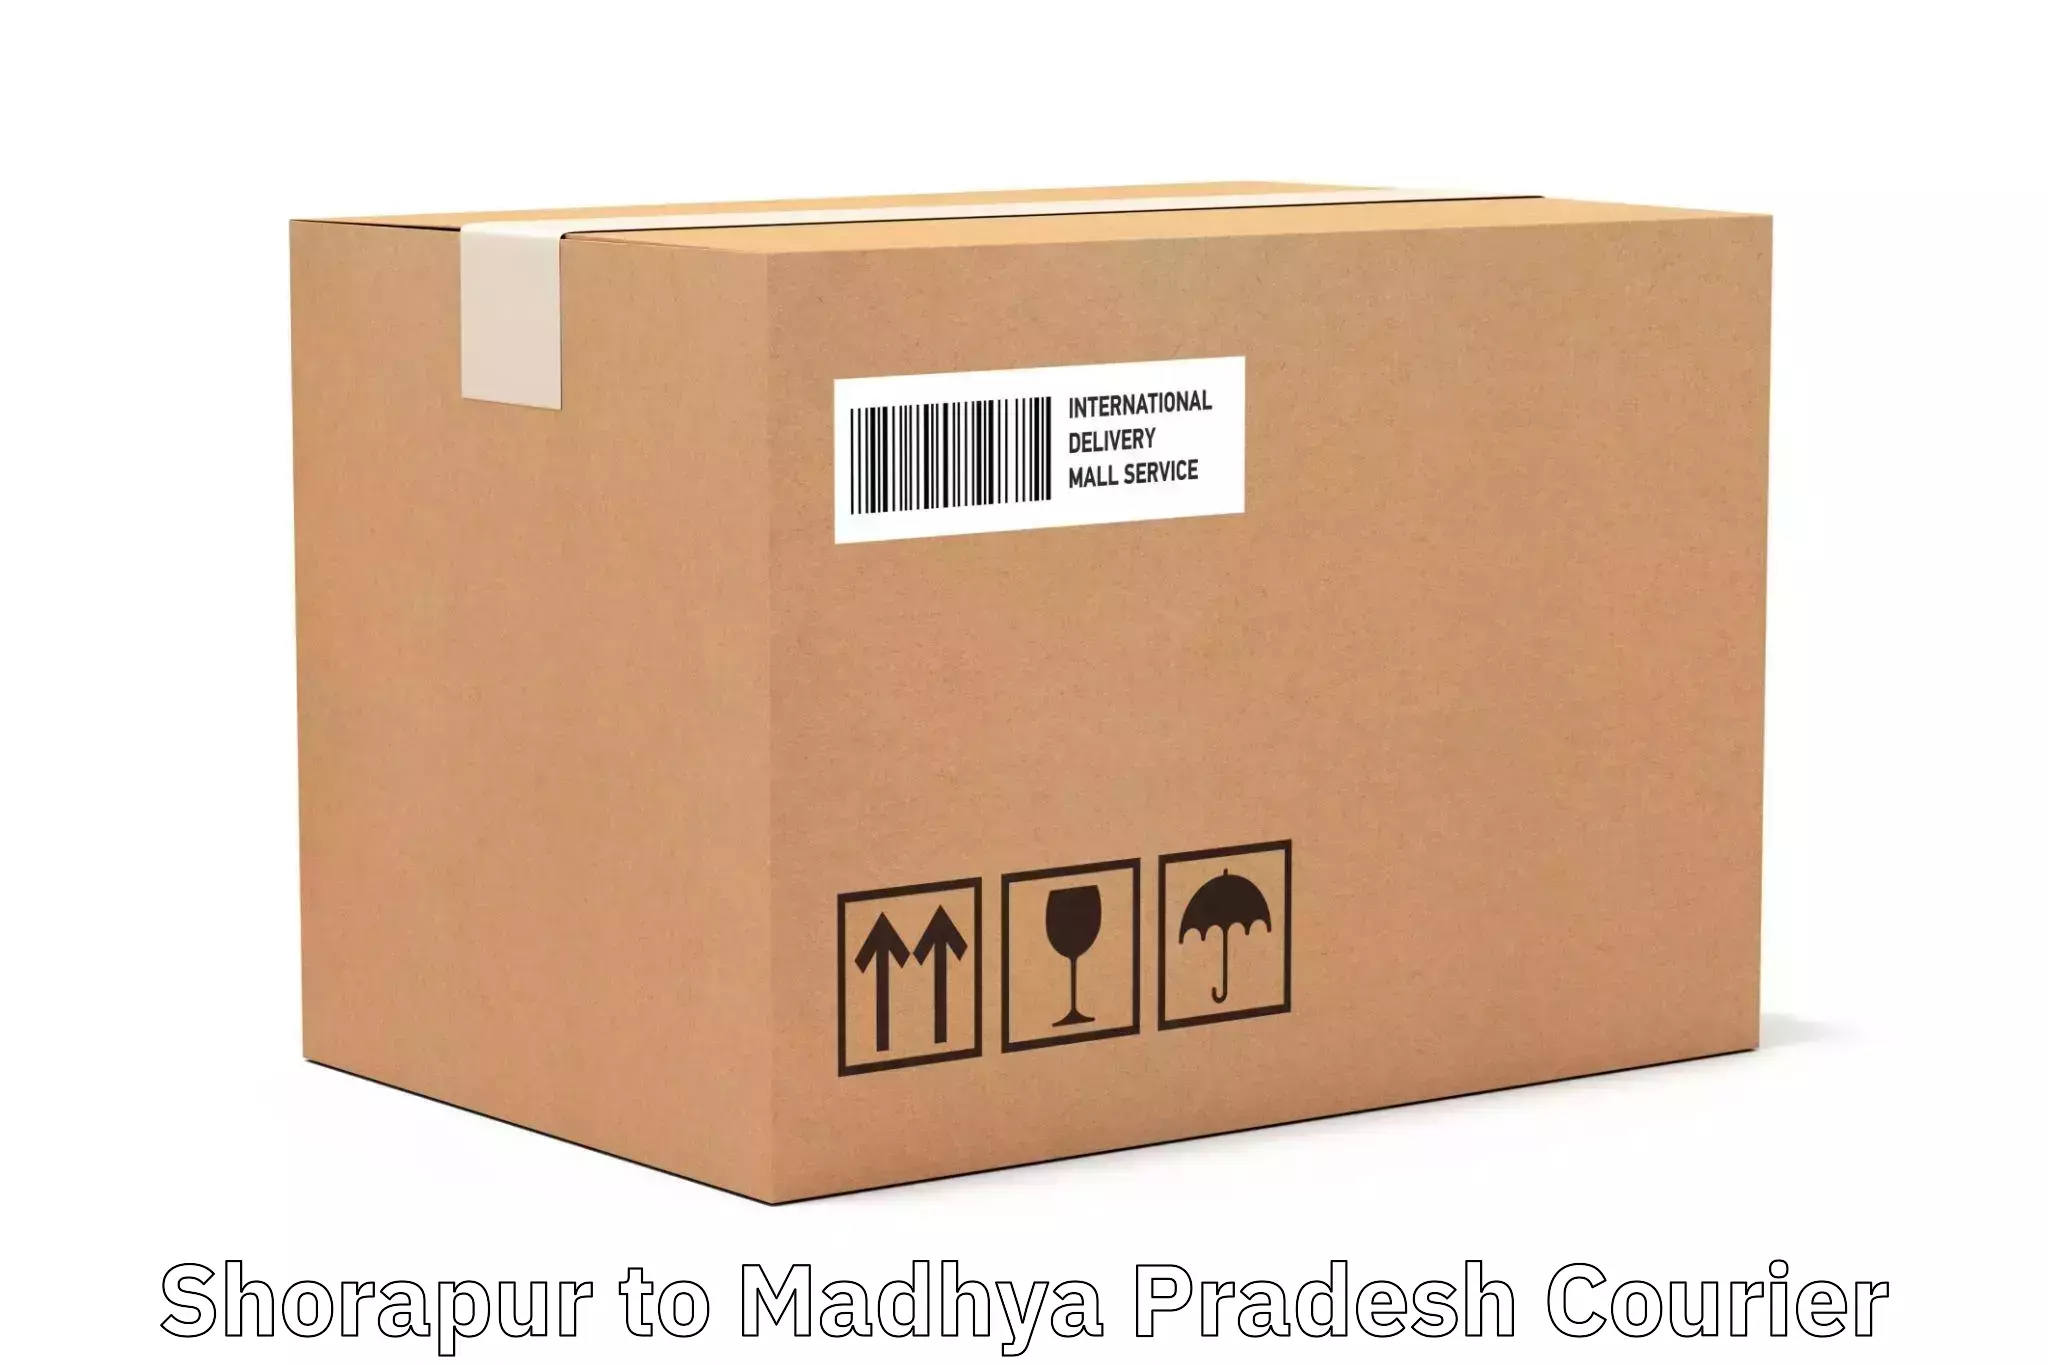 Courier service innovation Shorapur to Anuppur